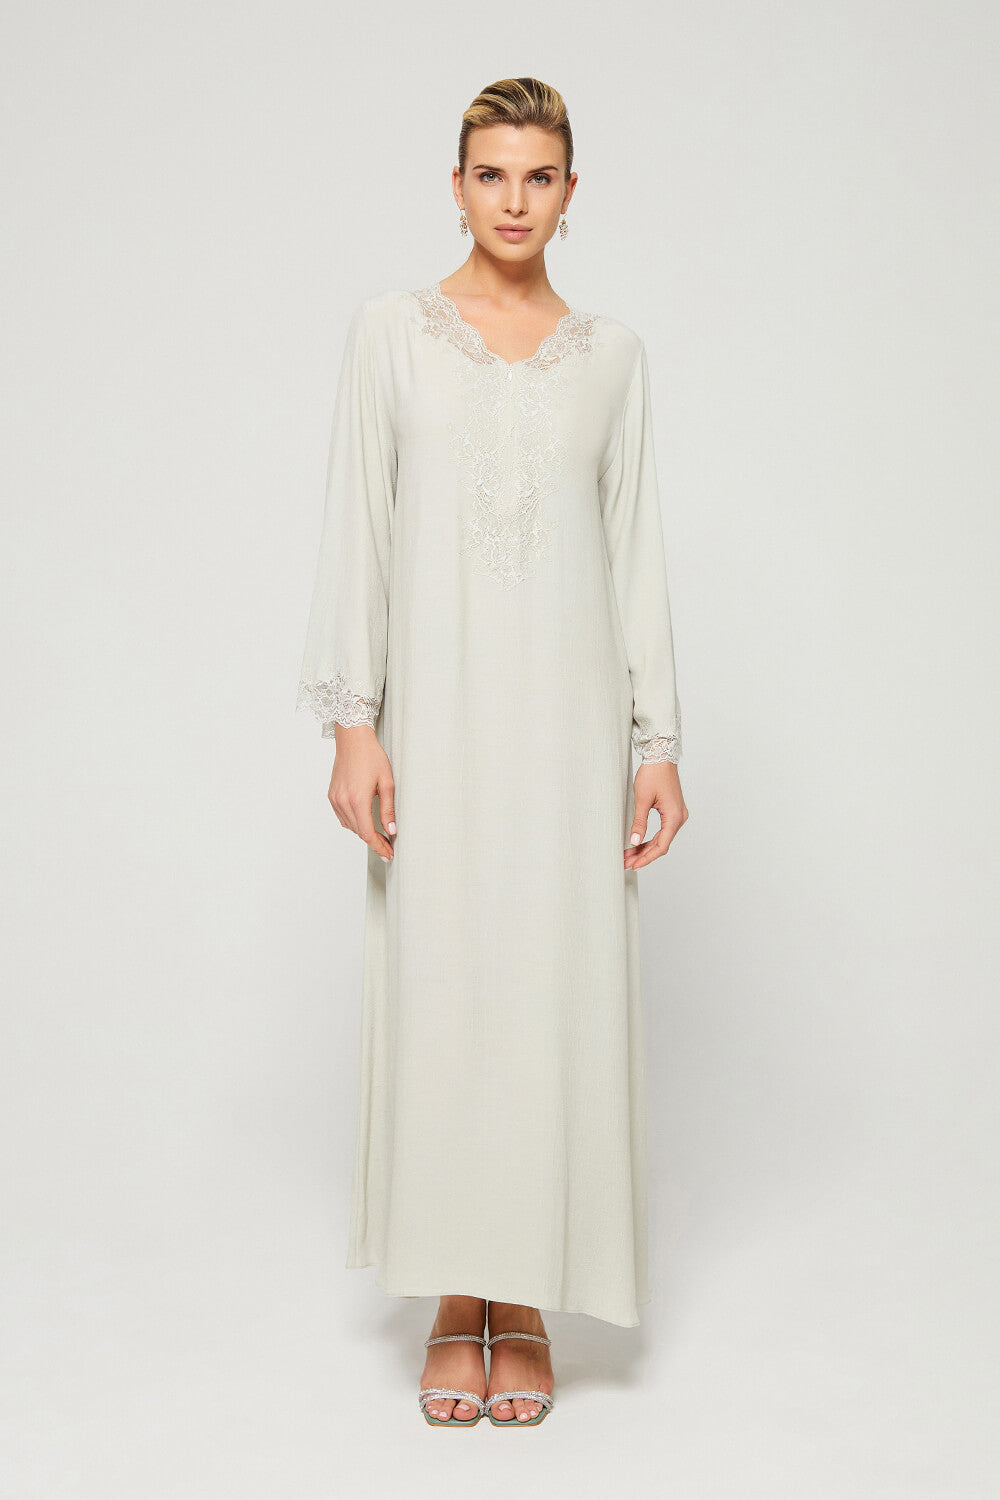 Minty - Long Sleeve Marocain Crepe Zippered Dress with Lace - Mint Green